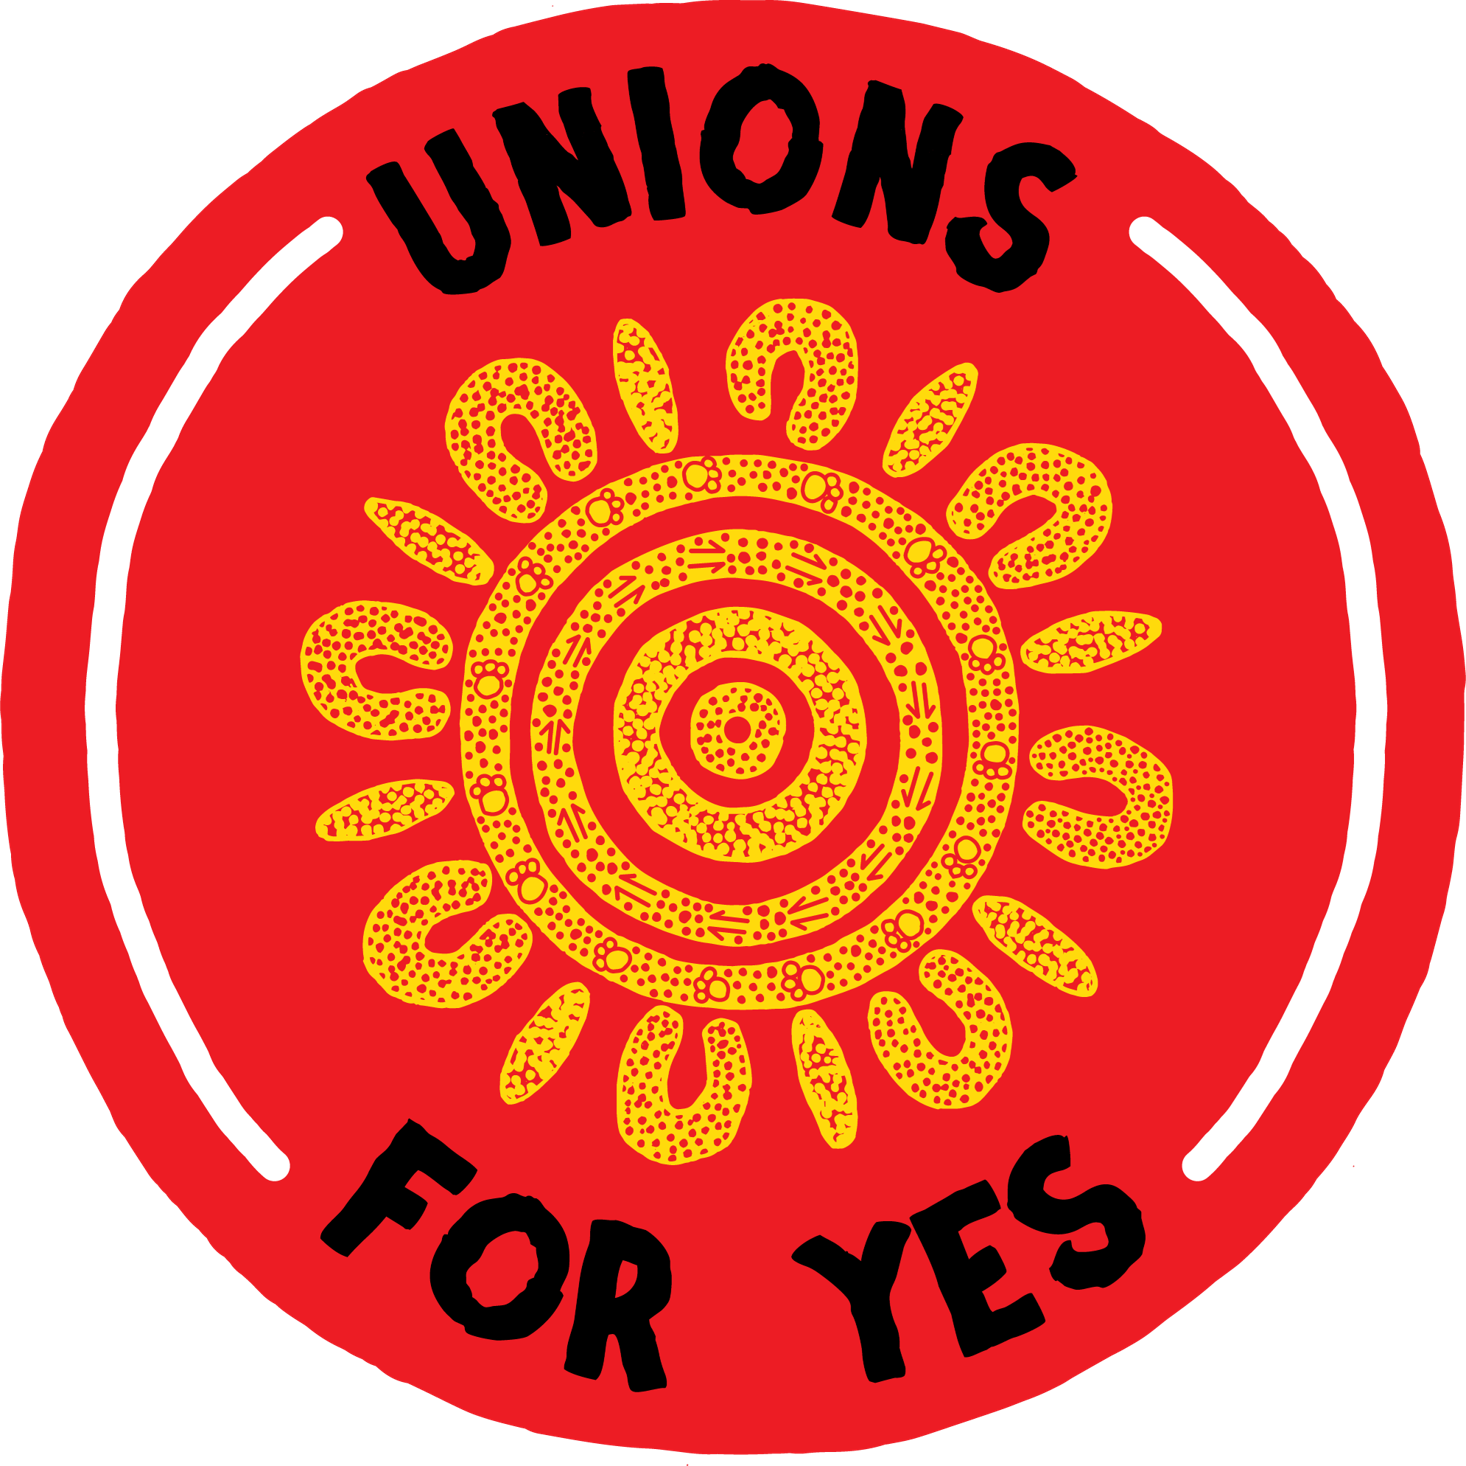 Nation’s teacher unions back Yes for Voice vote